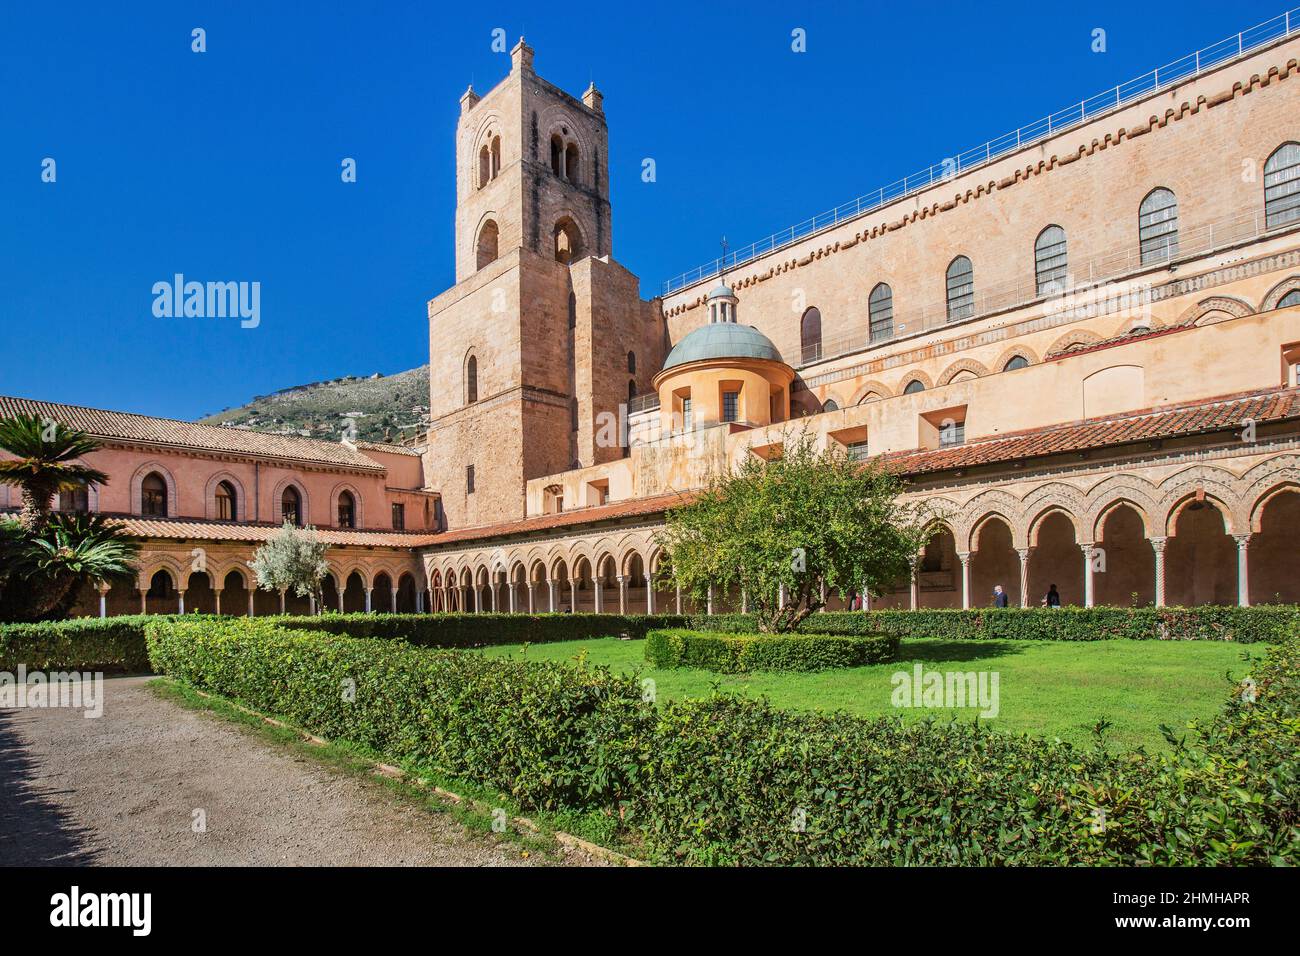 Cloister with garden of the Benedettino monastery at the cathedral with clock tower, Monreale, Sicily, Italy Stock Photo